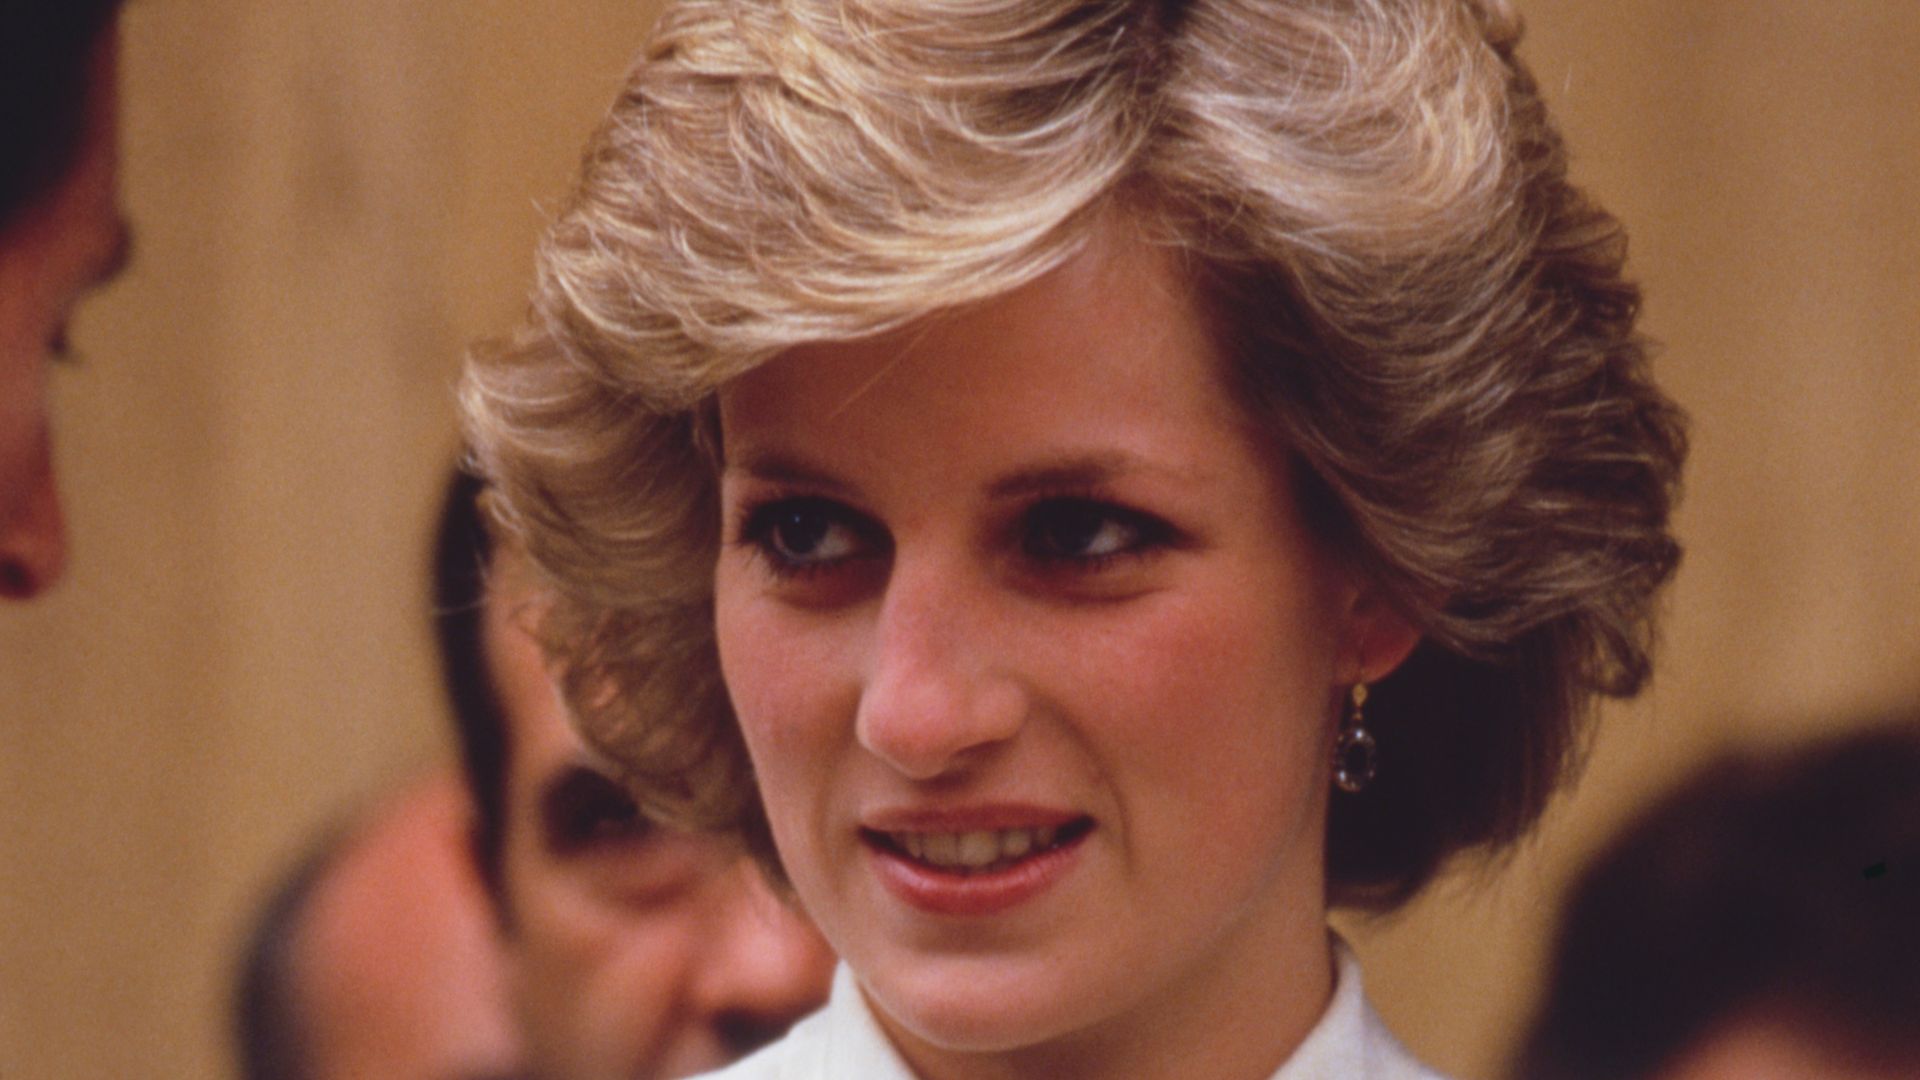 Princess Diana in a white outfit with a bowtie